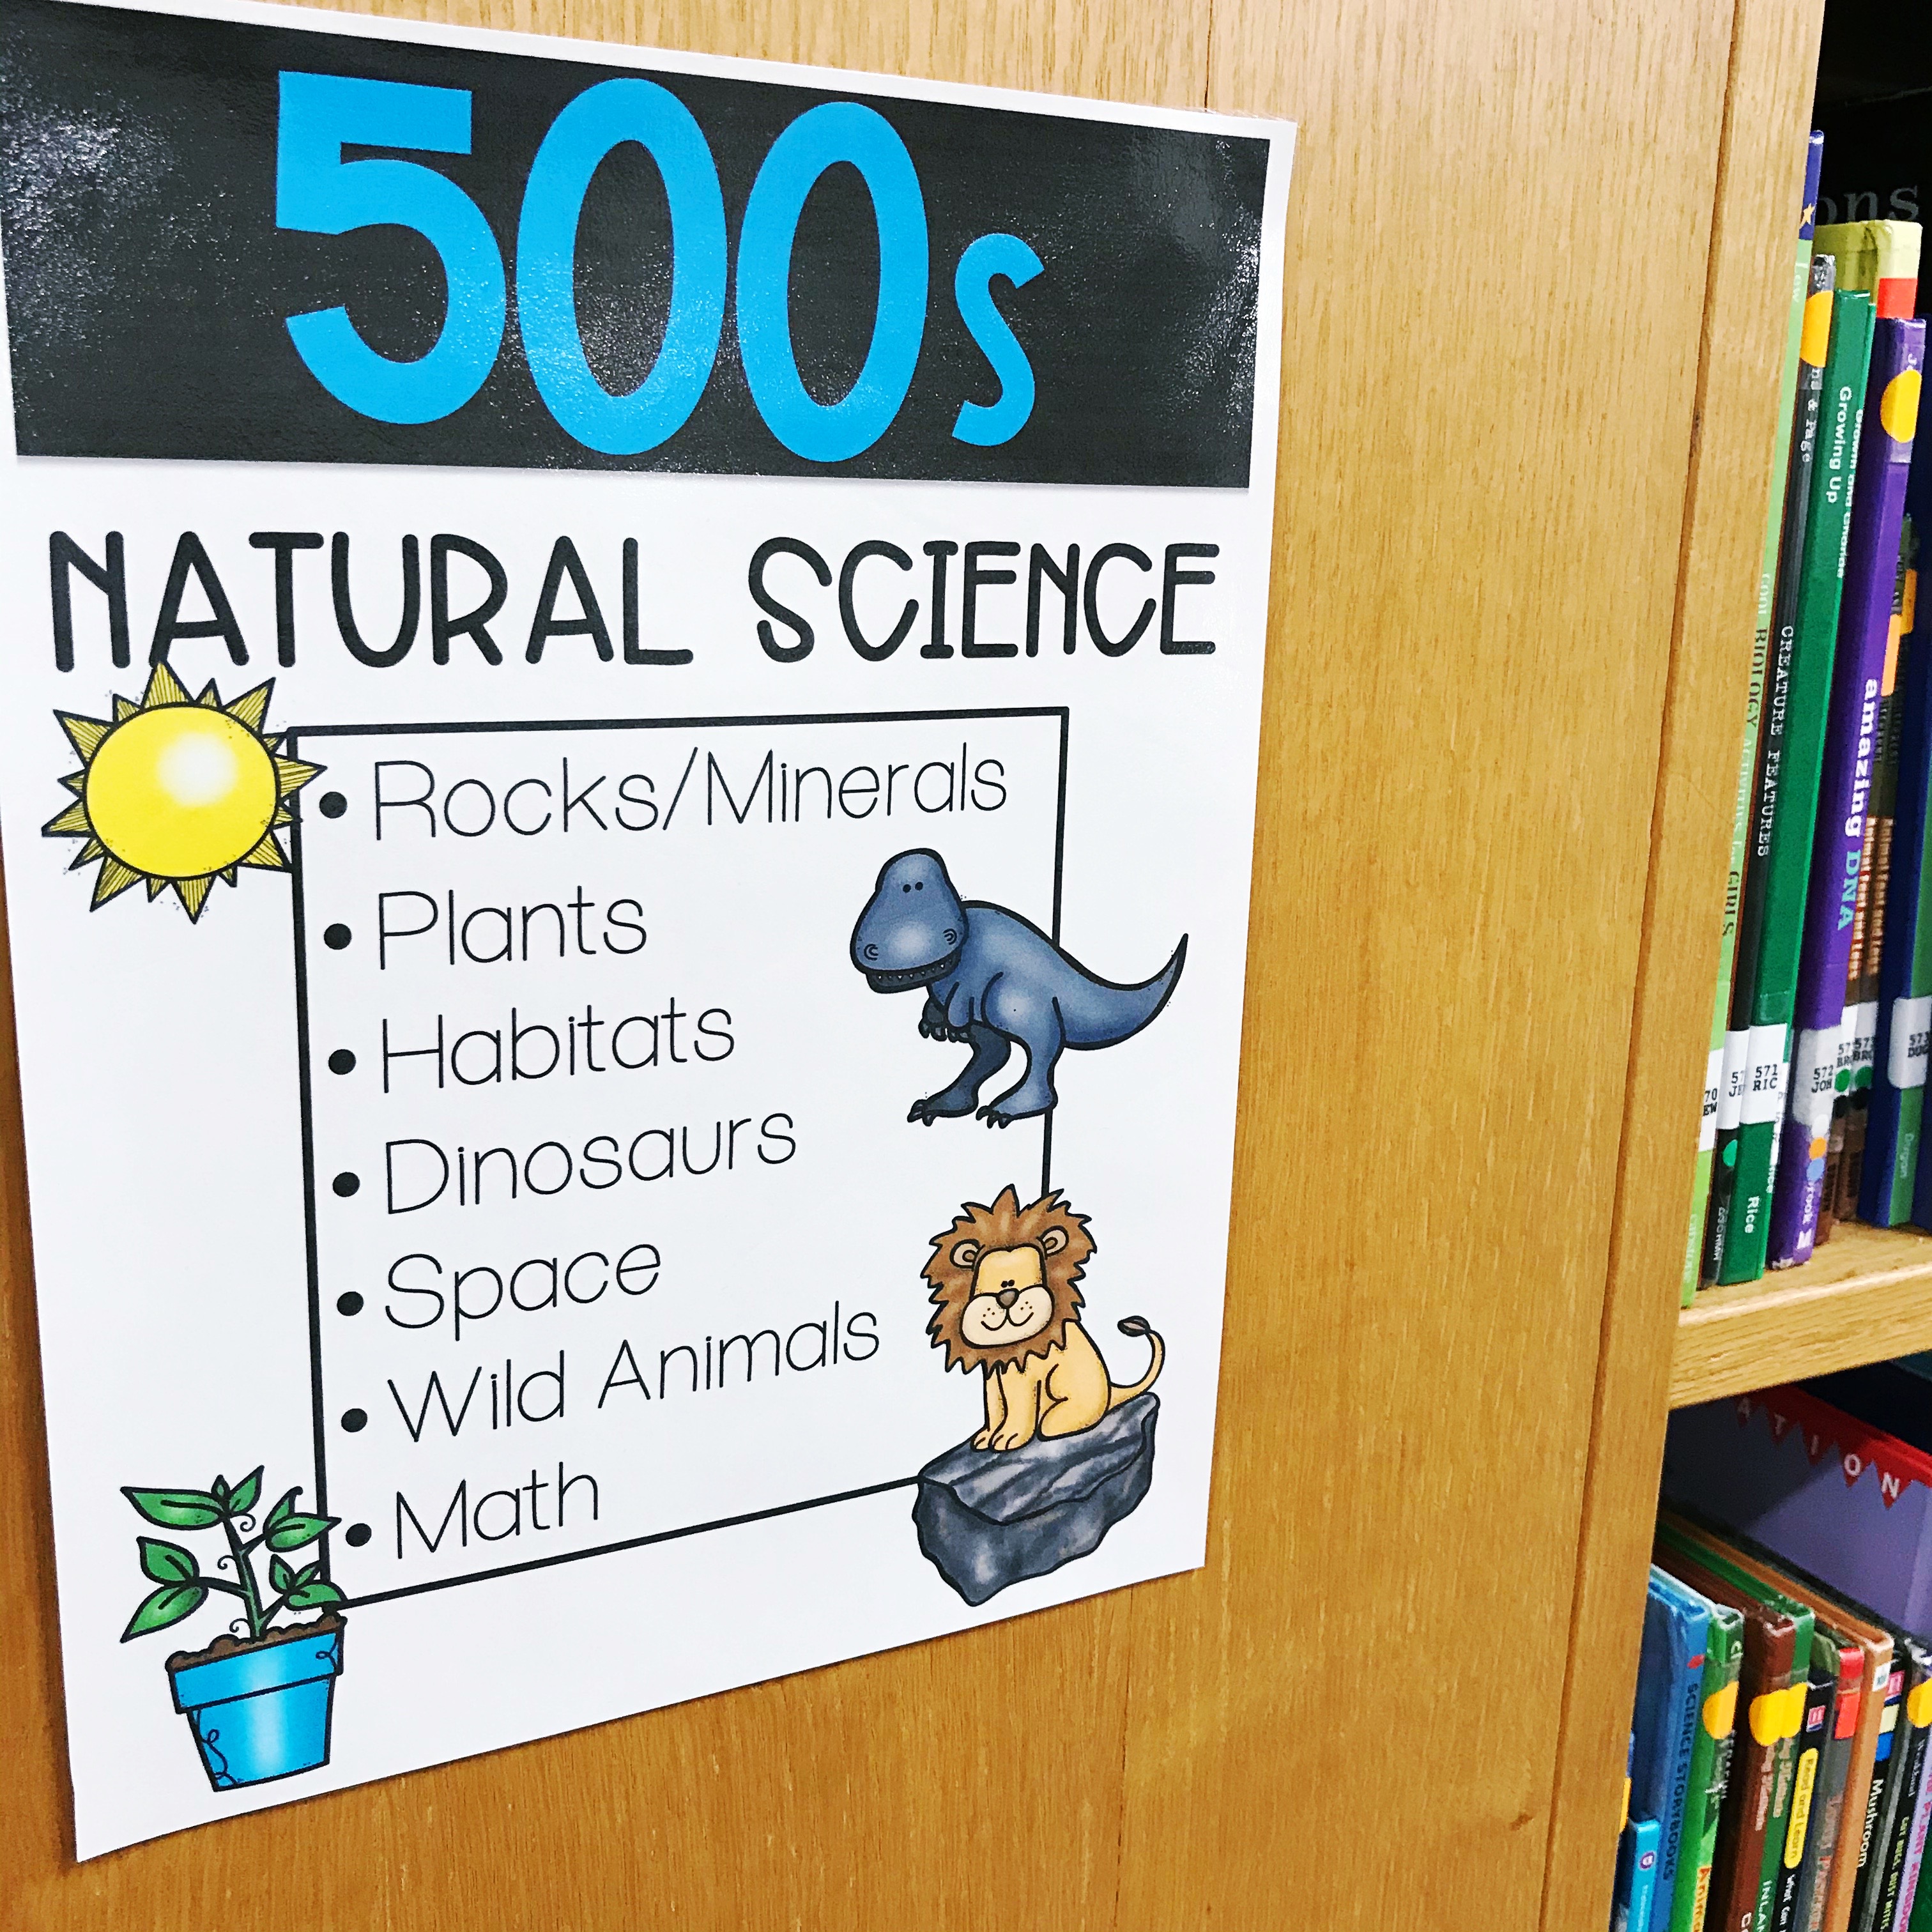 Dewey Decimal poster of the 500s section - natural science